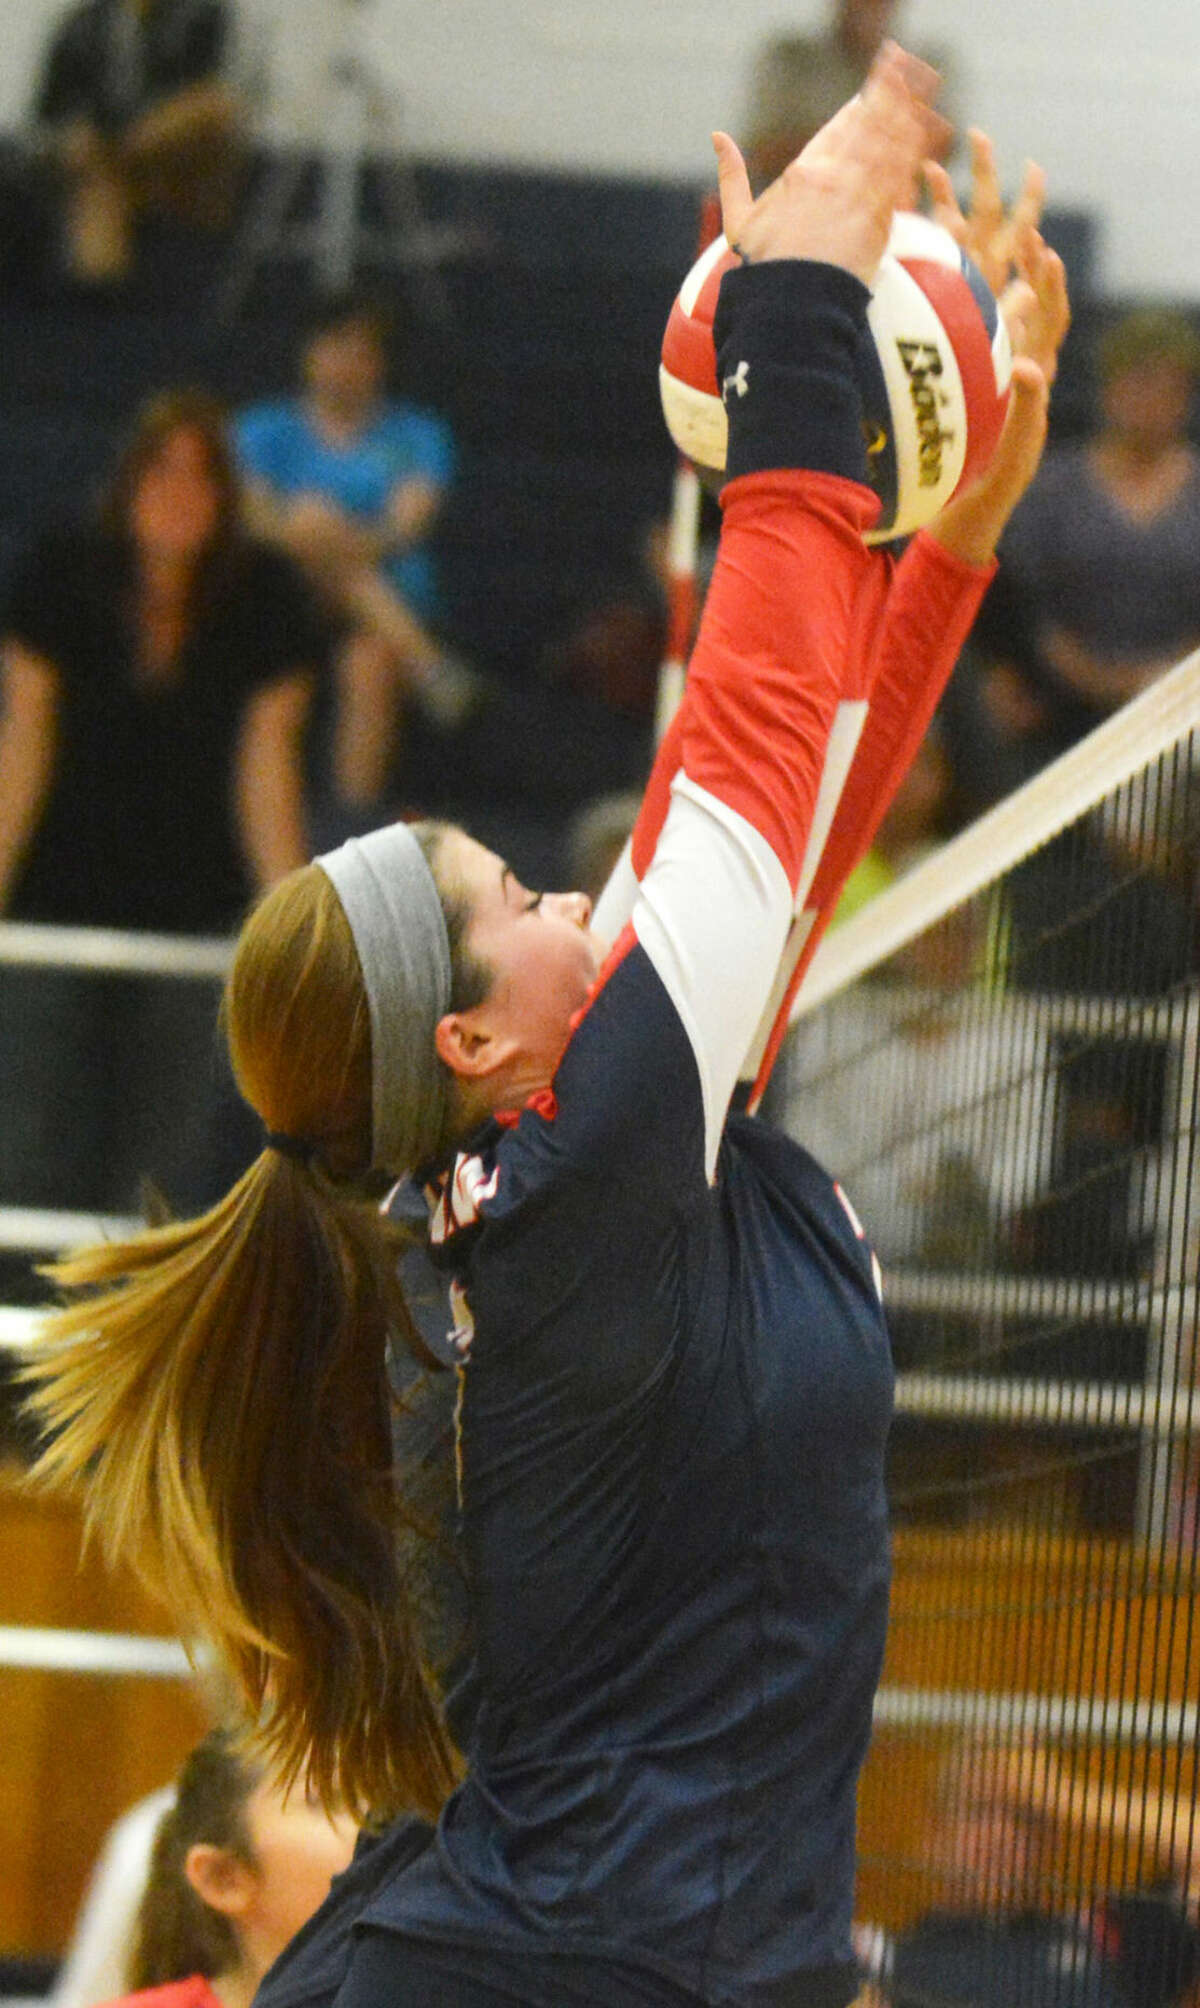 Plainview's Brooke Walker goes above the net to block a Lubbock High shot during a District 4-5A volleyball match at the Dog House Tuesday night. The left-handed senior had 34 kills in a tough five-game loss to the Lady Westerners.